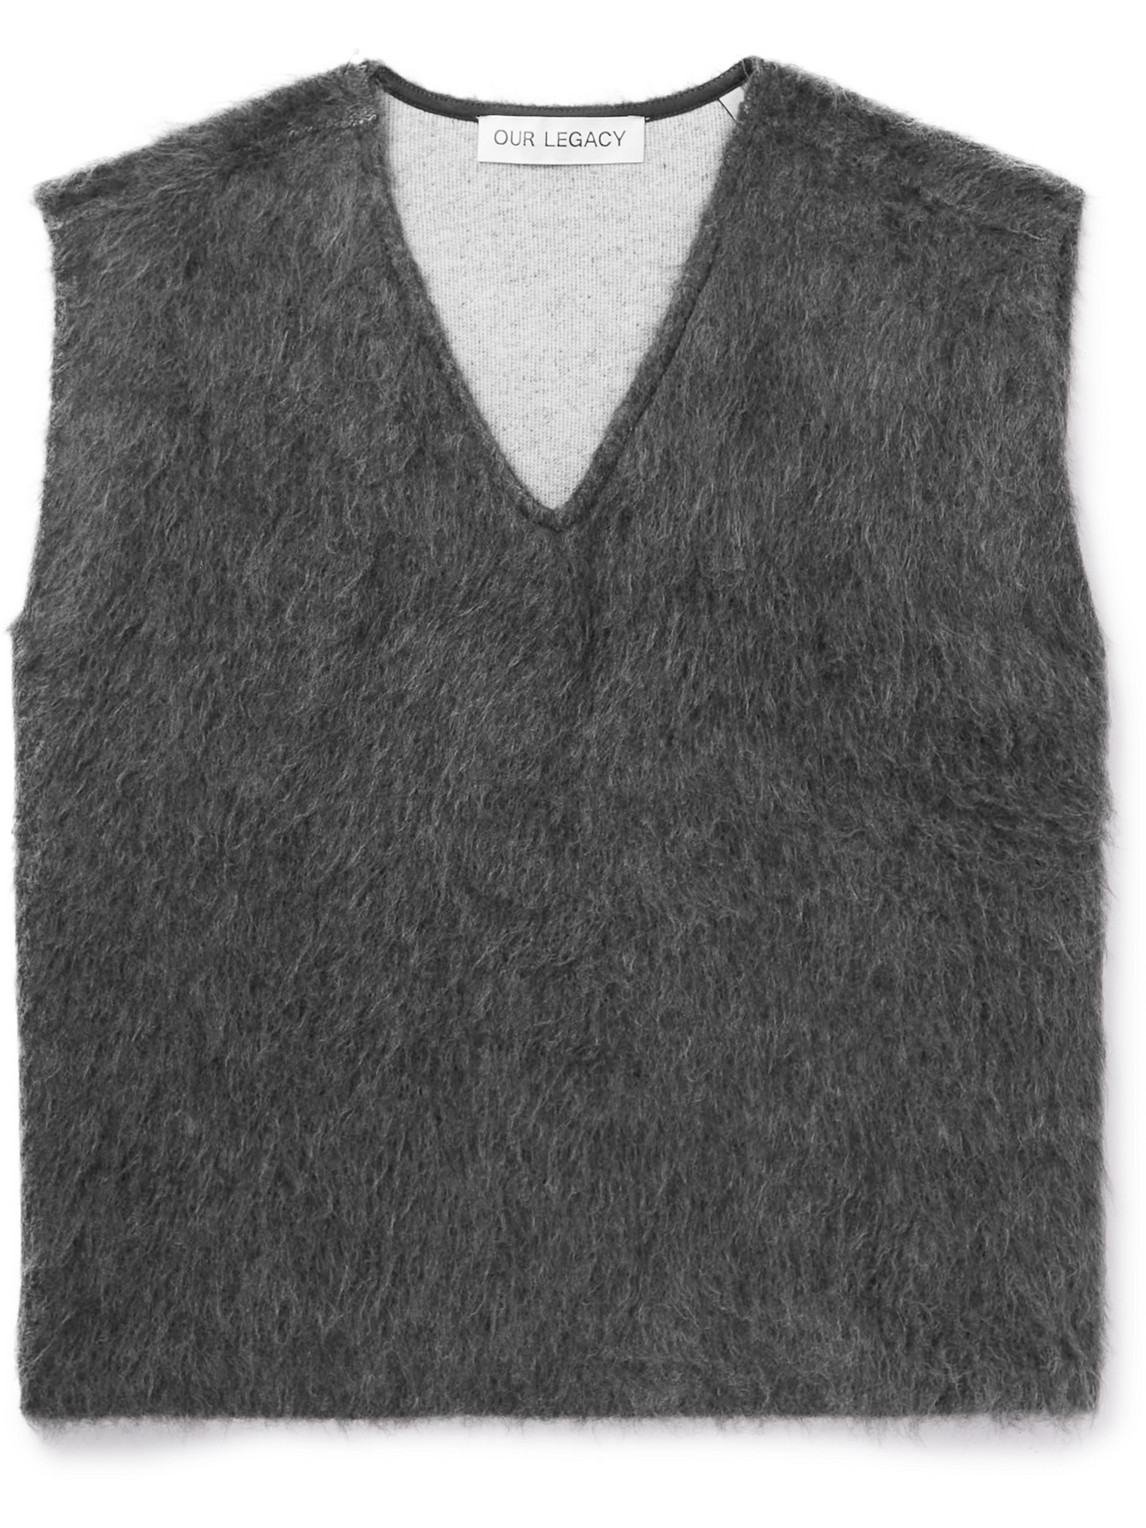 OUR LEGACY DOUBLE LOCK BRUSHED-KNIT SWEATER VEST